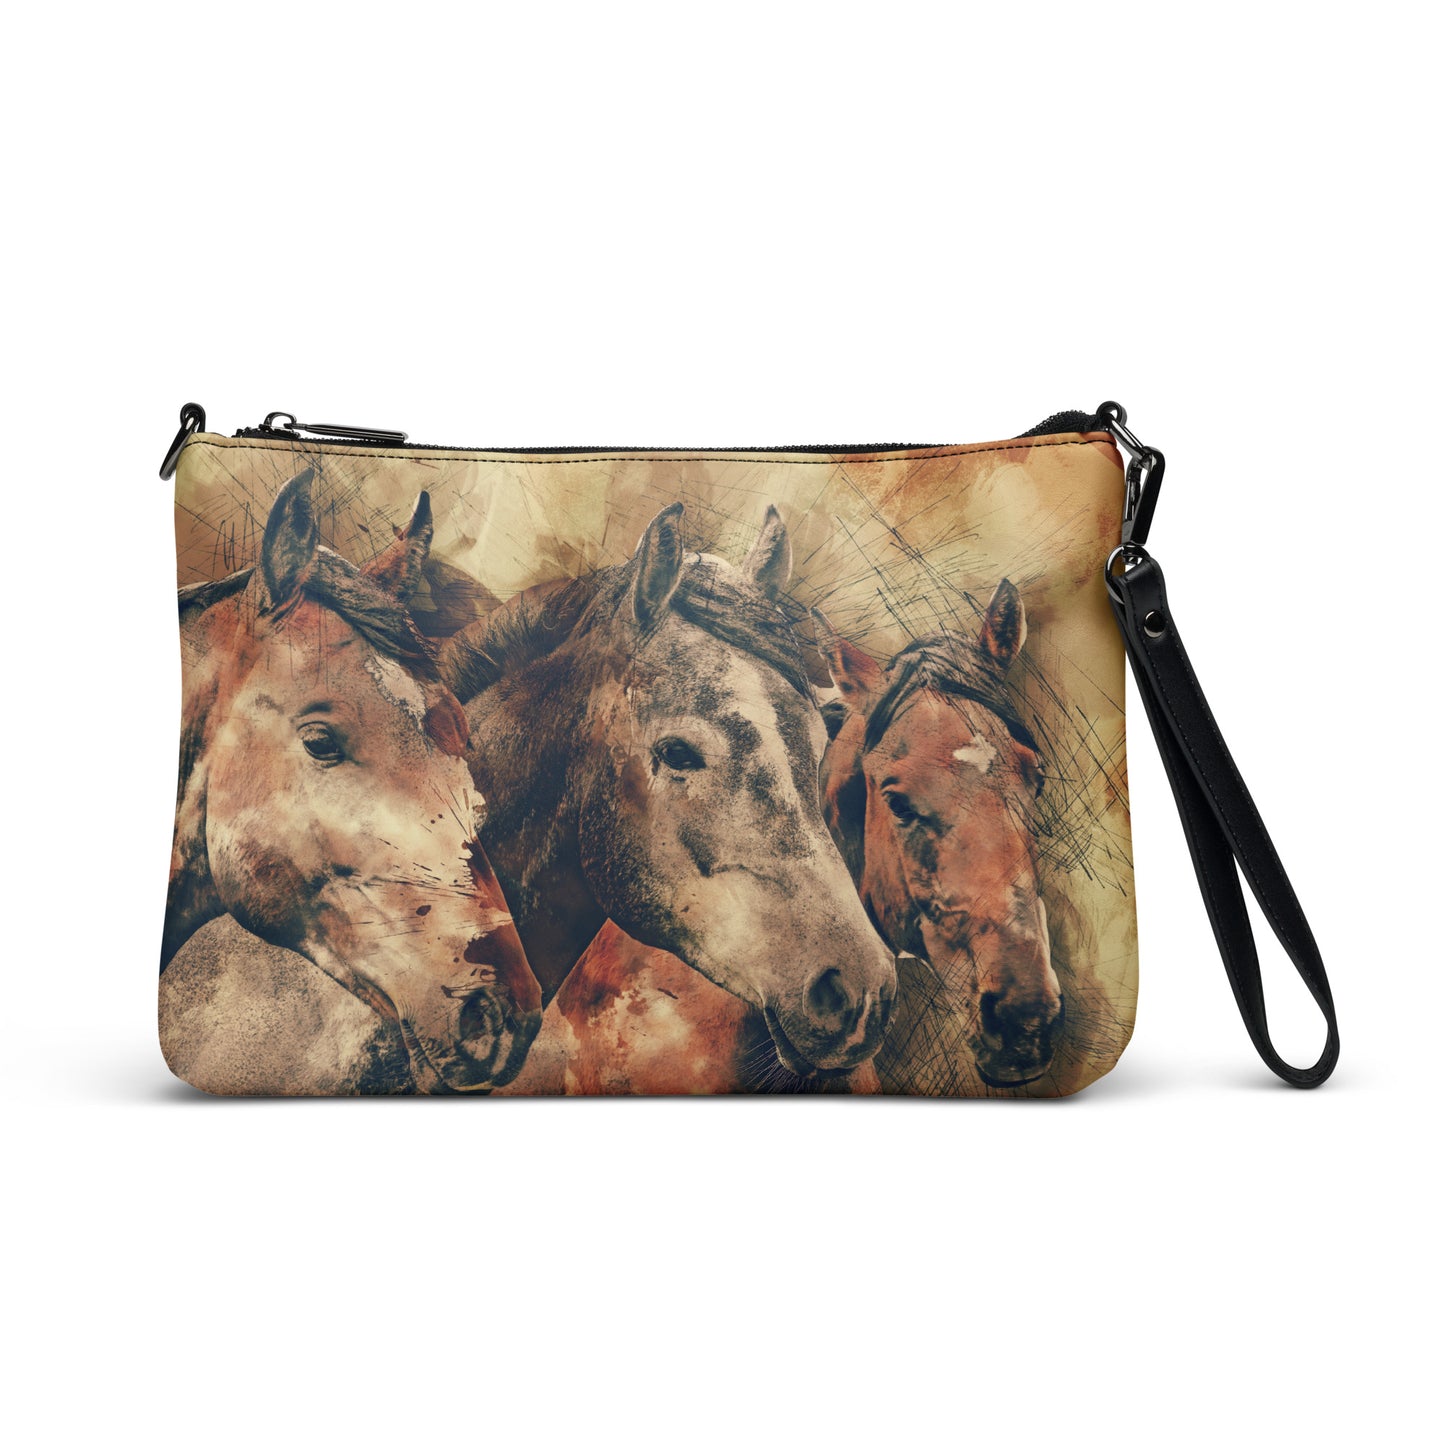 Crossbody bag Printed with a scene of 3 Horses